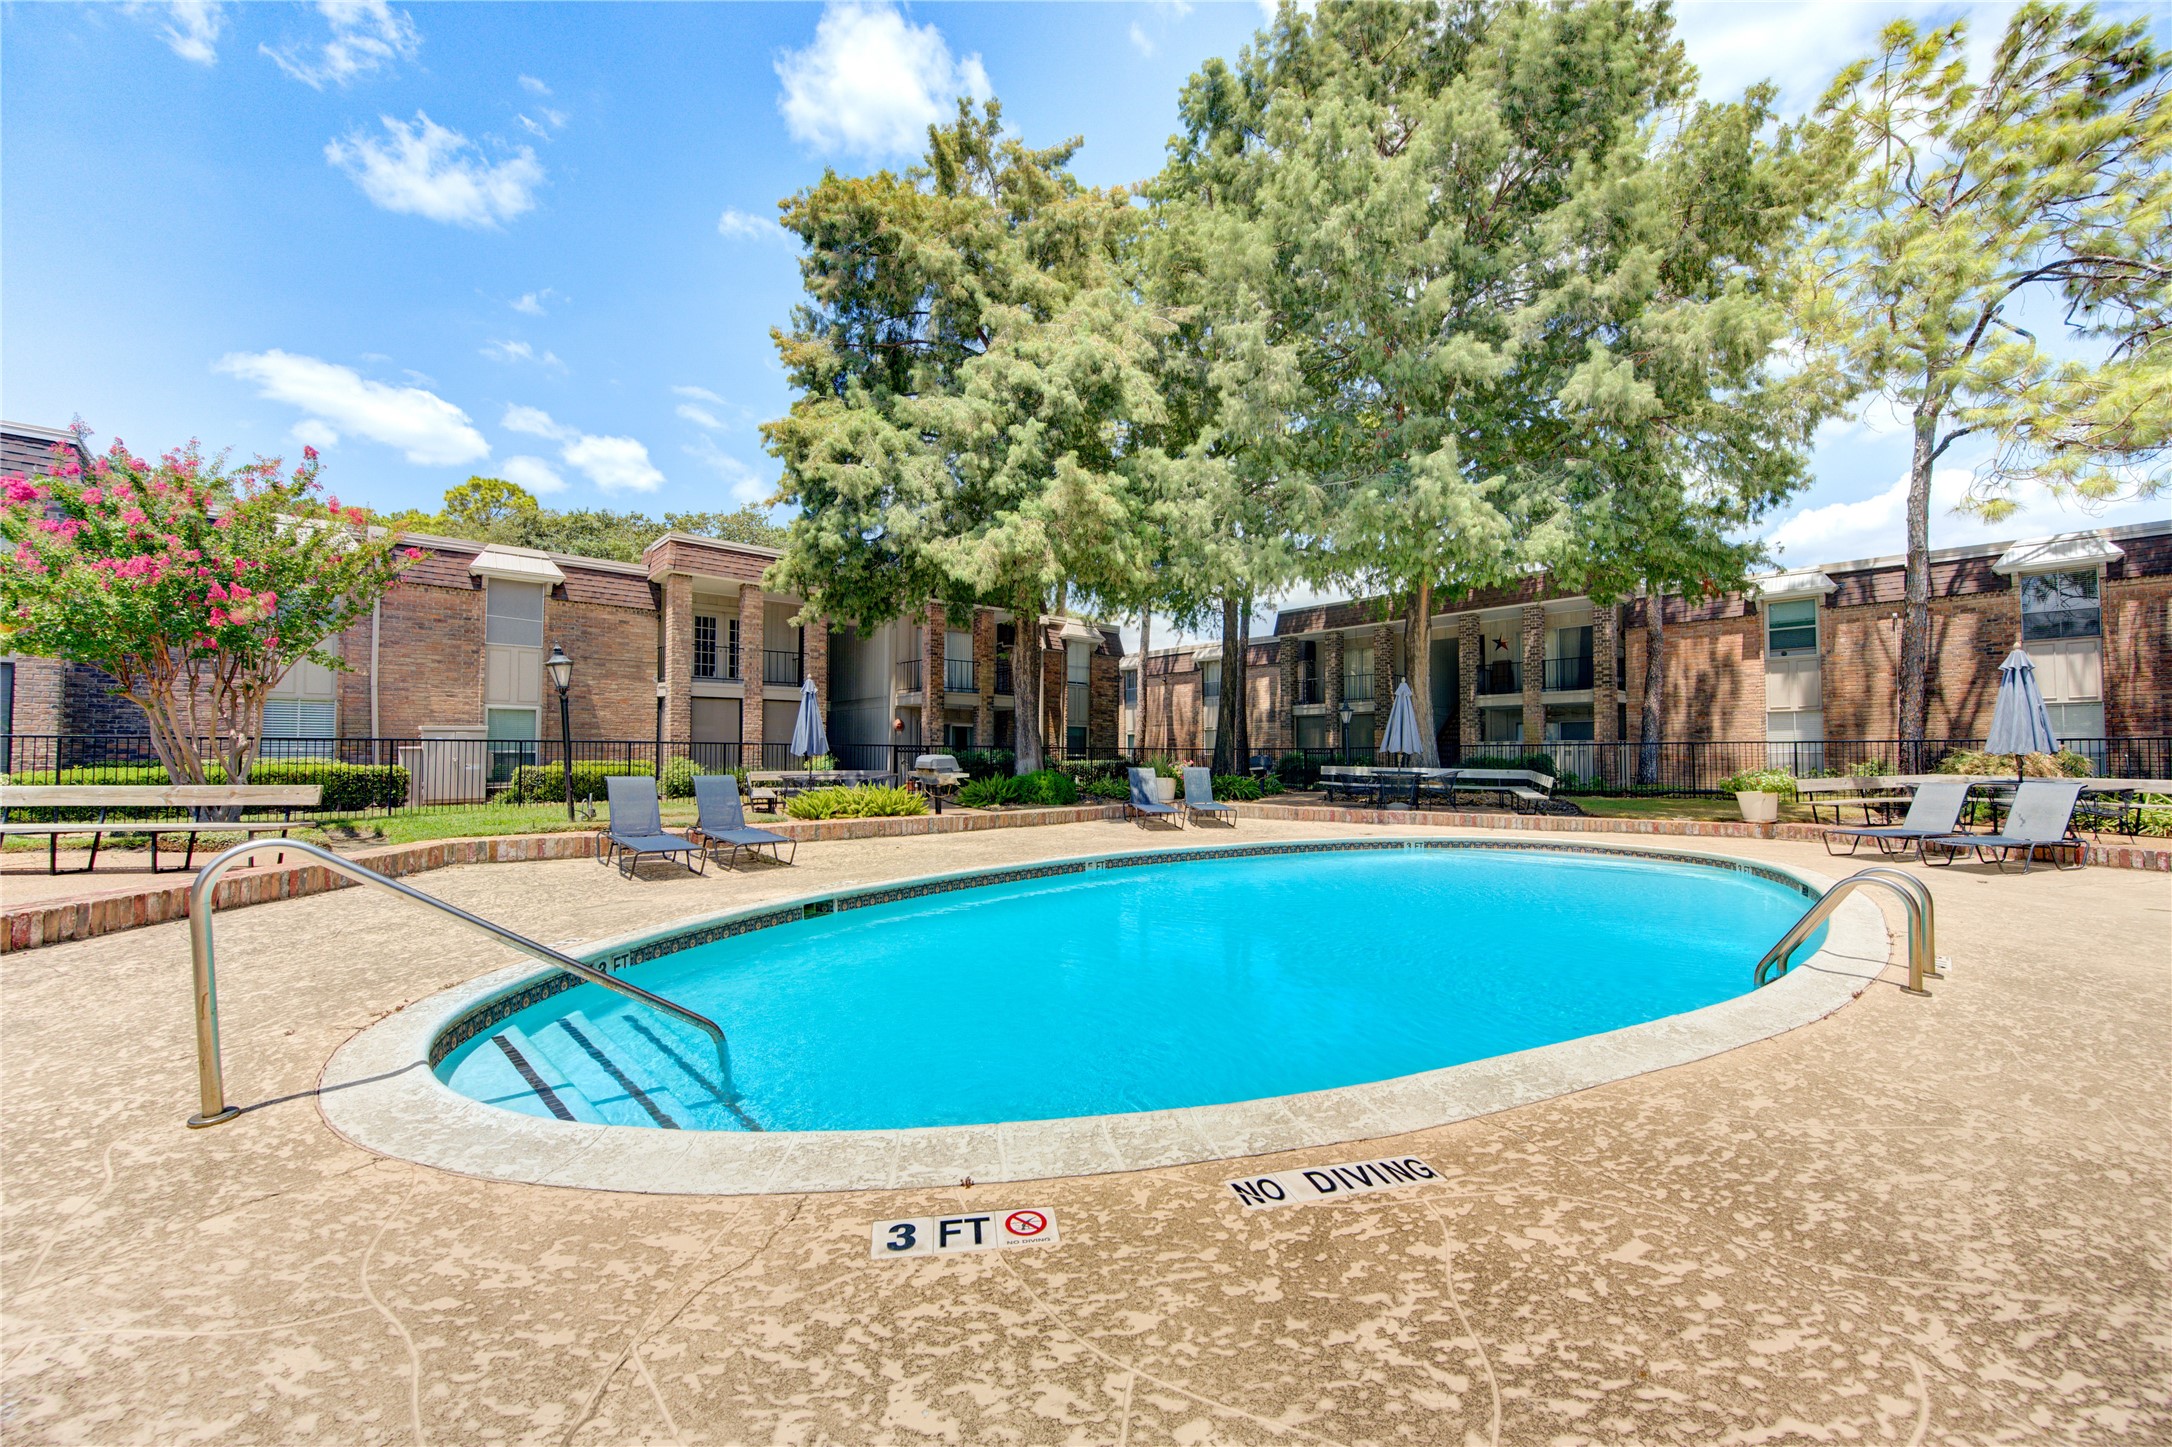 You'll love living in Bayou Woods where you'll be living amongst beautiful landscaping, have access to TWO SPARKLING POOLS, and have round the clock security! Here's a shot of the luscious second pool as well!